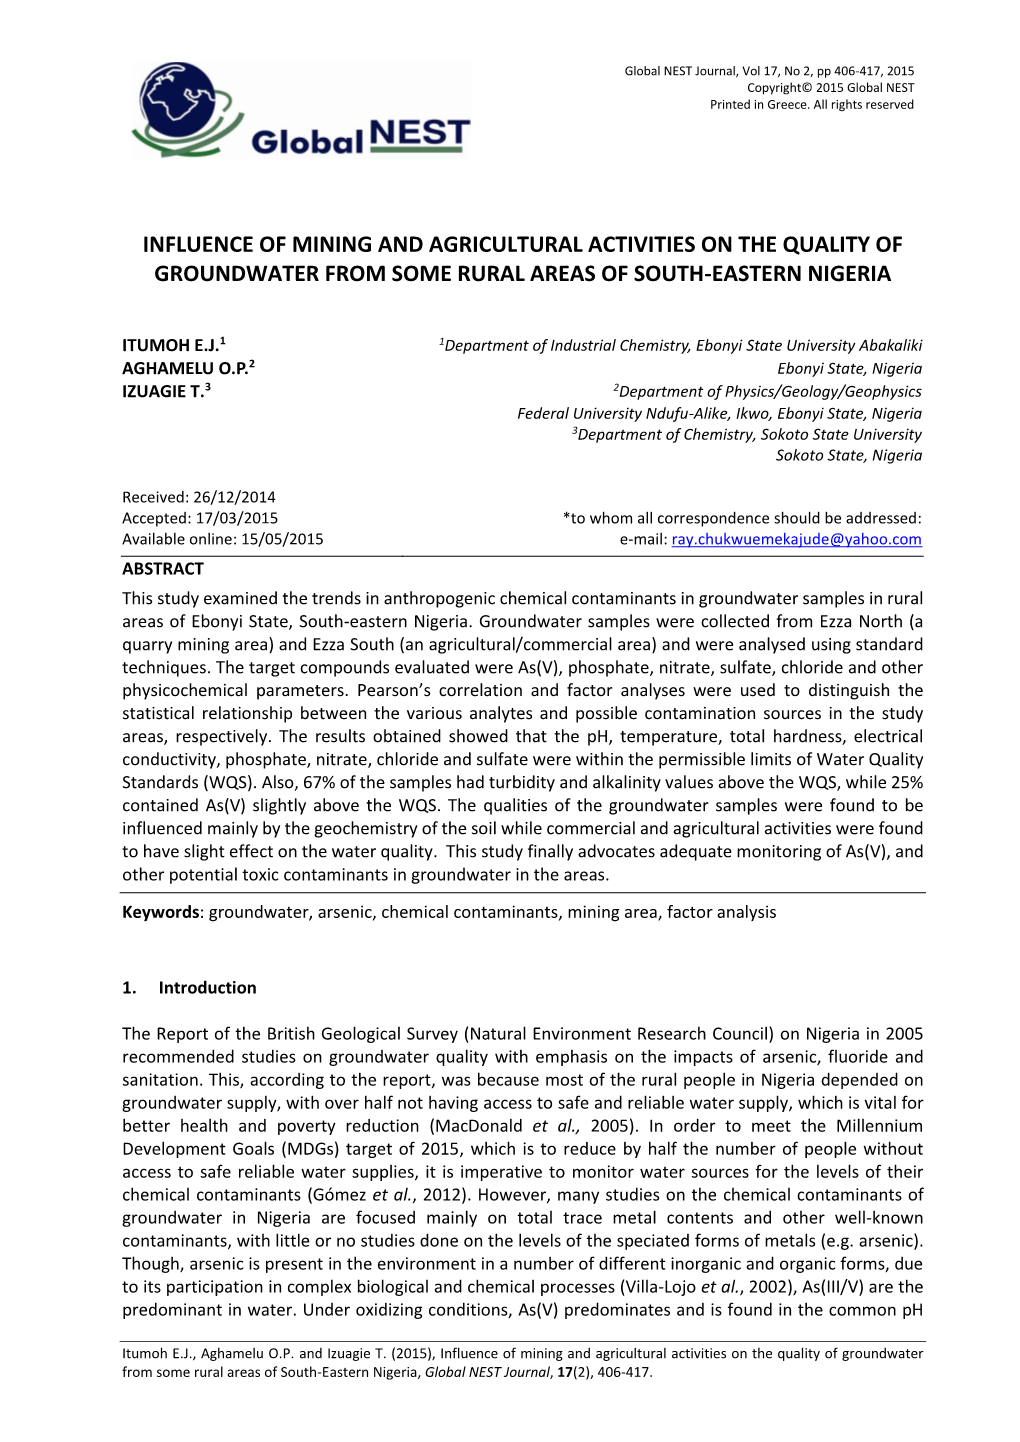 Influence of Mining and Agricultural Activities on the Quality of Groundwater from Some Rural Areas of South-Eastern Nigeria